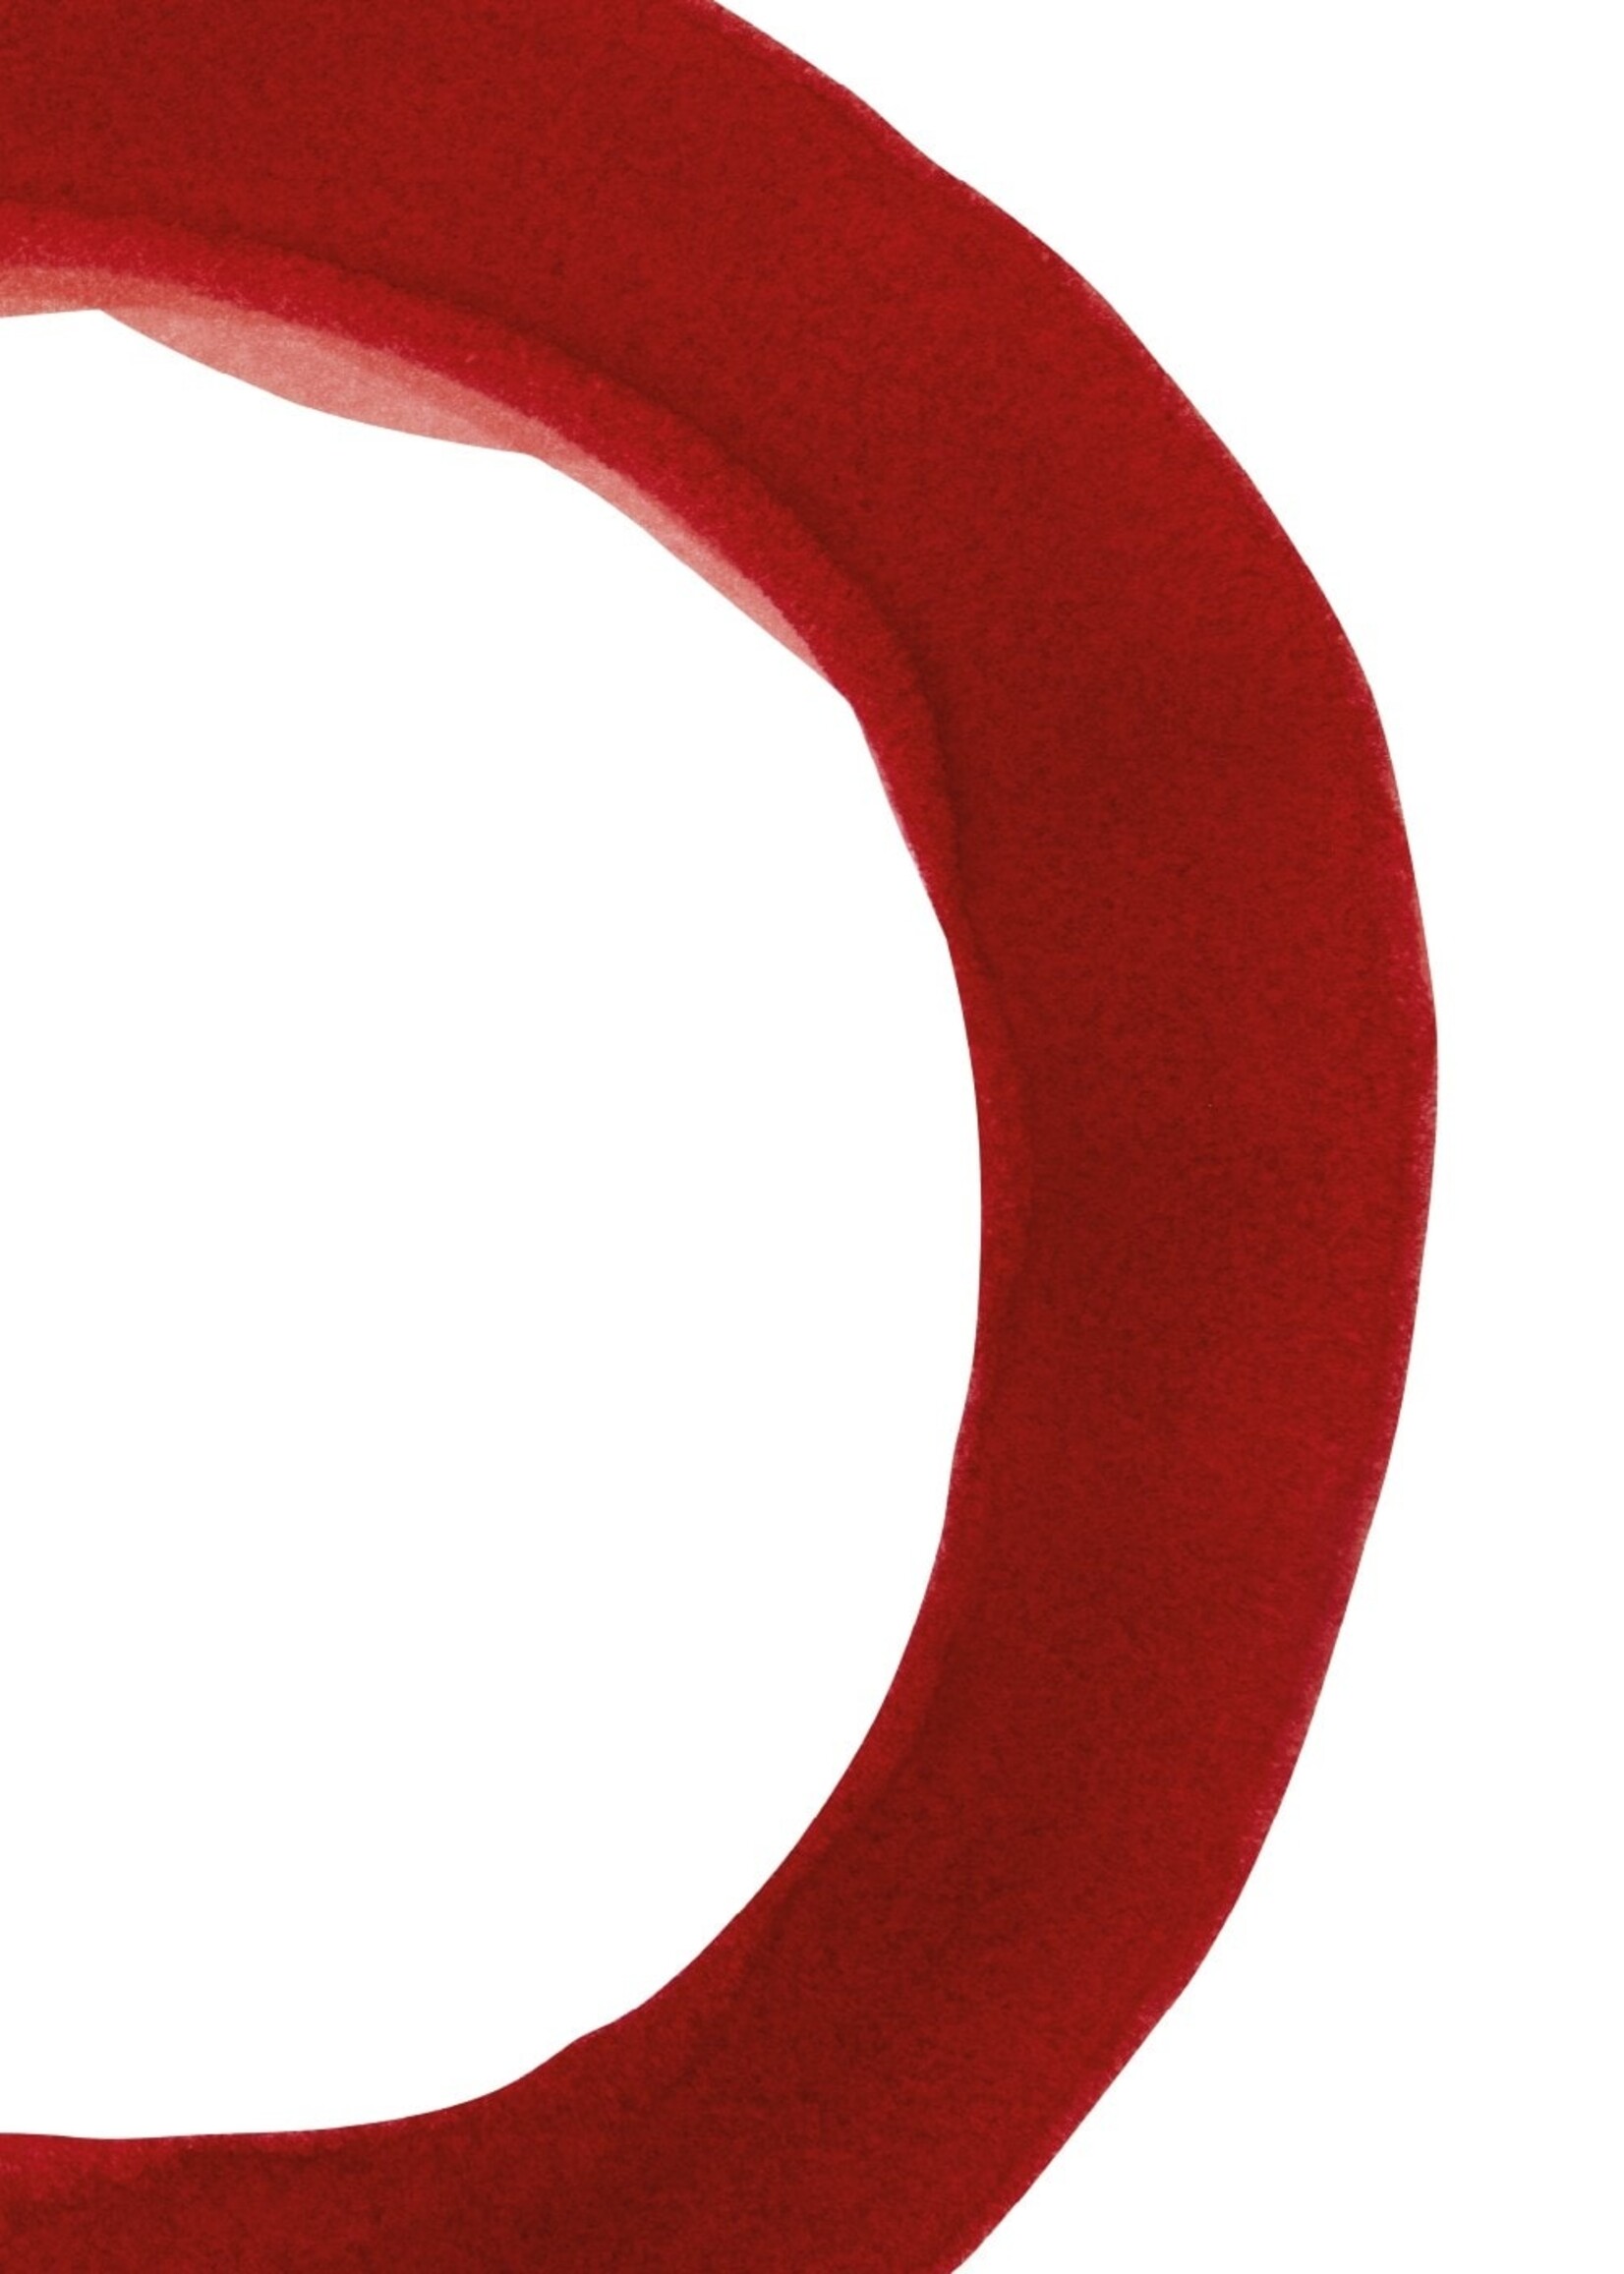 Paper Collective Paper Collective Poster Norm Architects Enso Red II 30x40cm